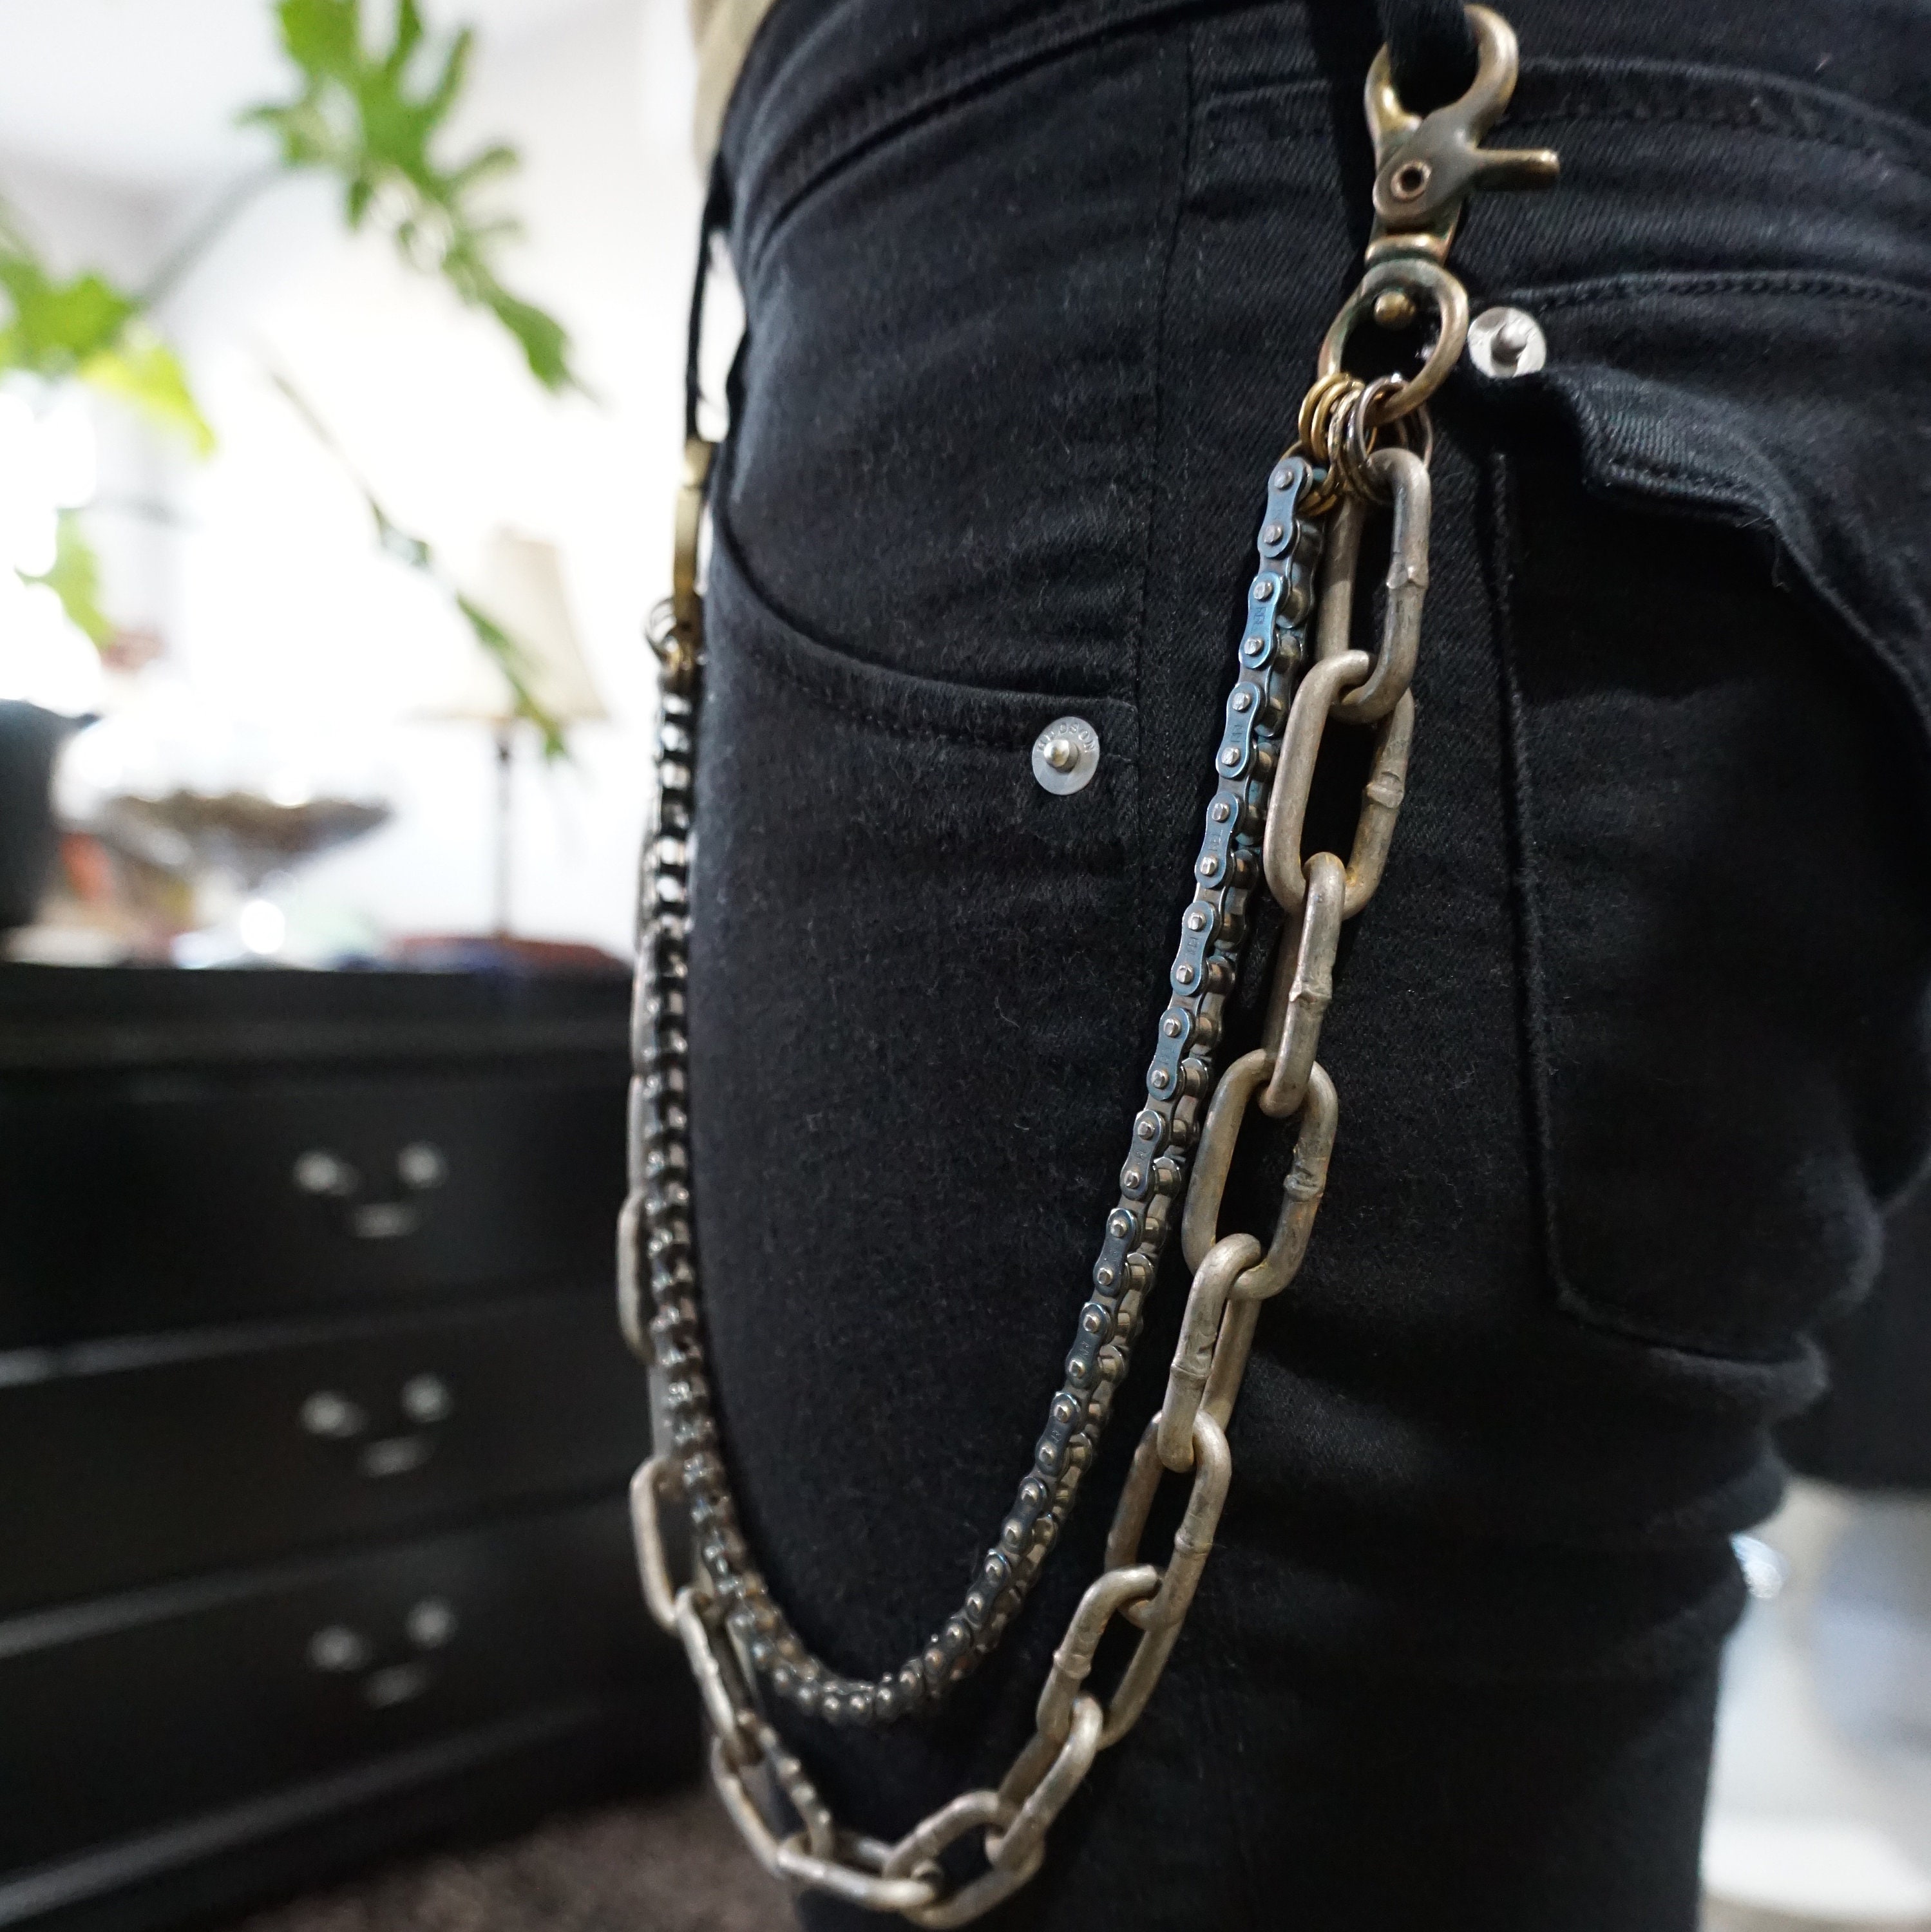 Double Wallet Chain with O Ring, Belt chain, 90's Trouser chain,  Industrial, Alt